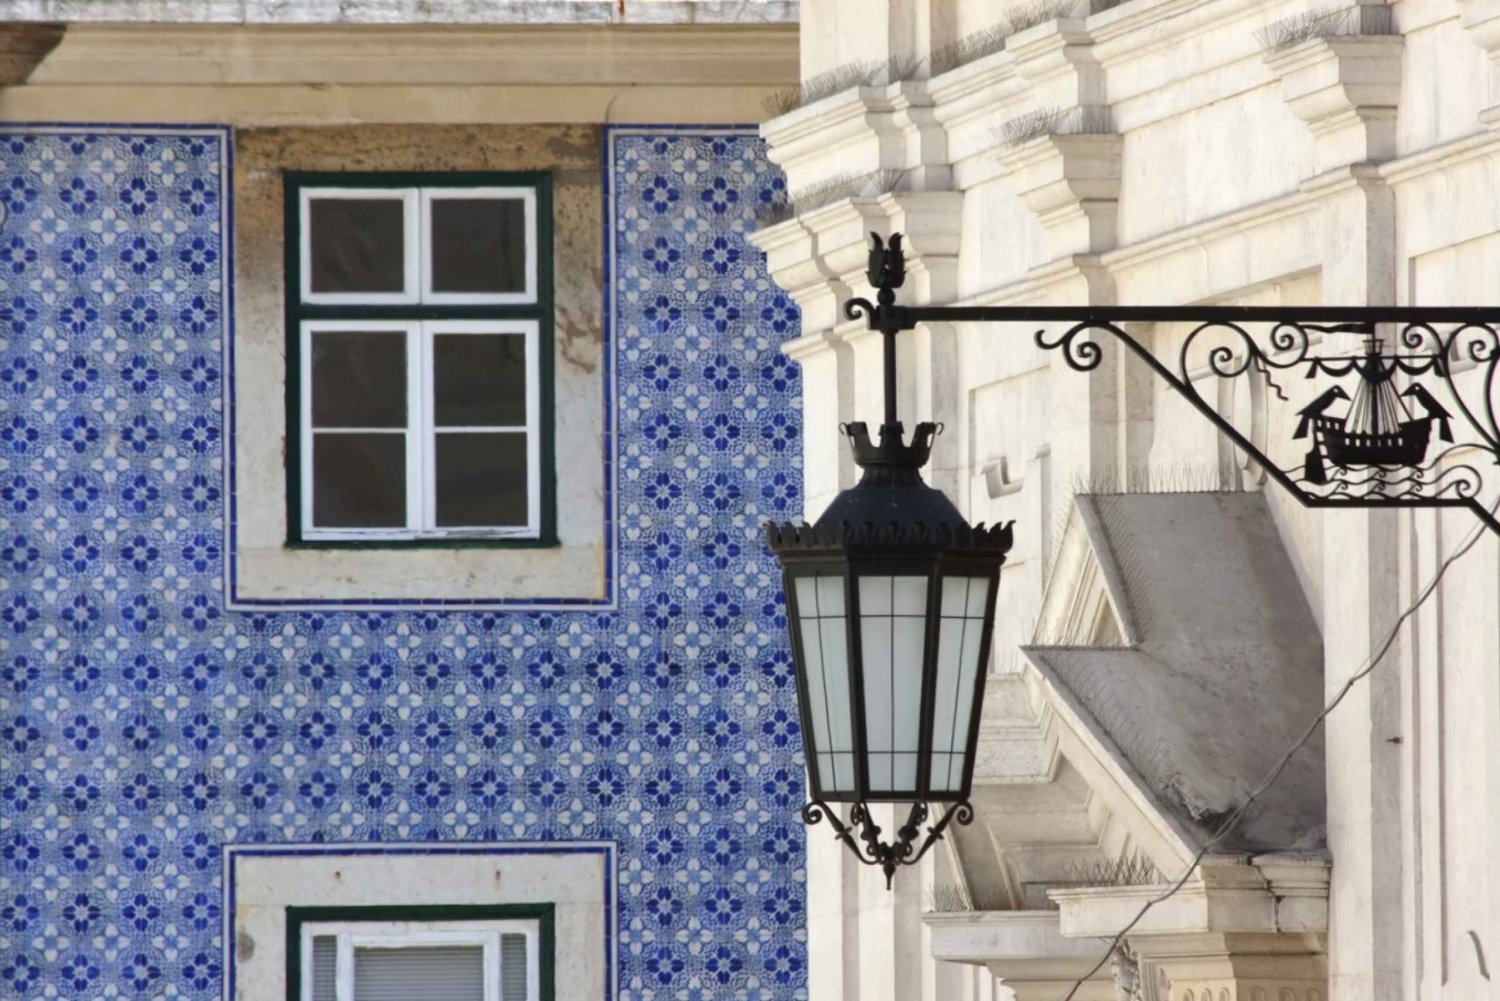 From Algarve: Lisbon City Tour with Shopping